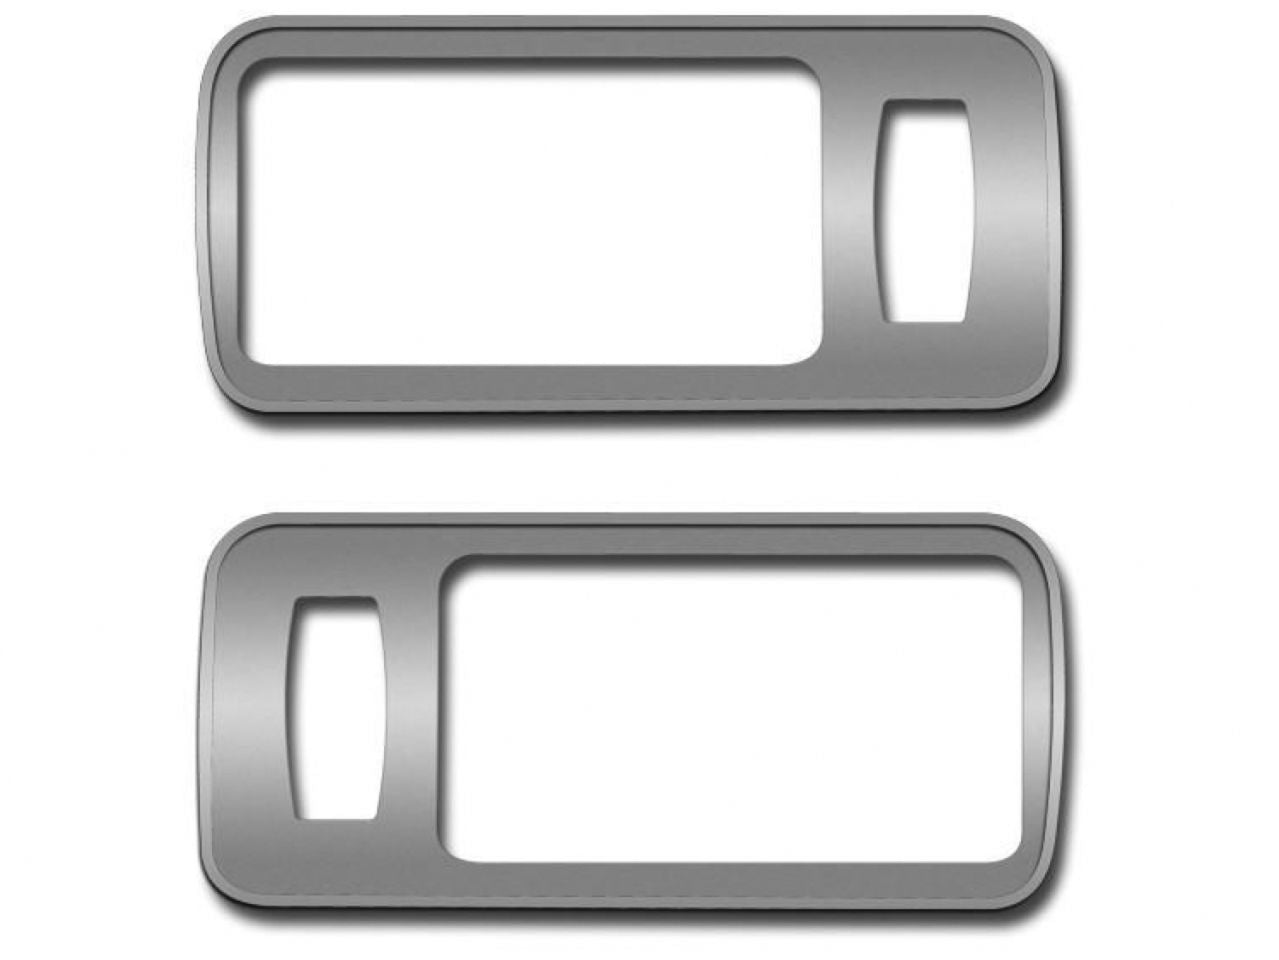 American Car Craft (ACC) 2005-2014 Mustang - Door Handle Trim Plates 2Pc Brushed w/Polished